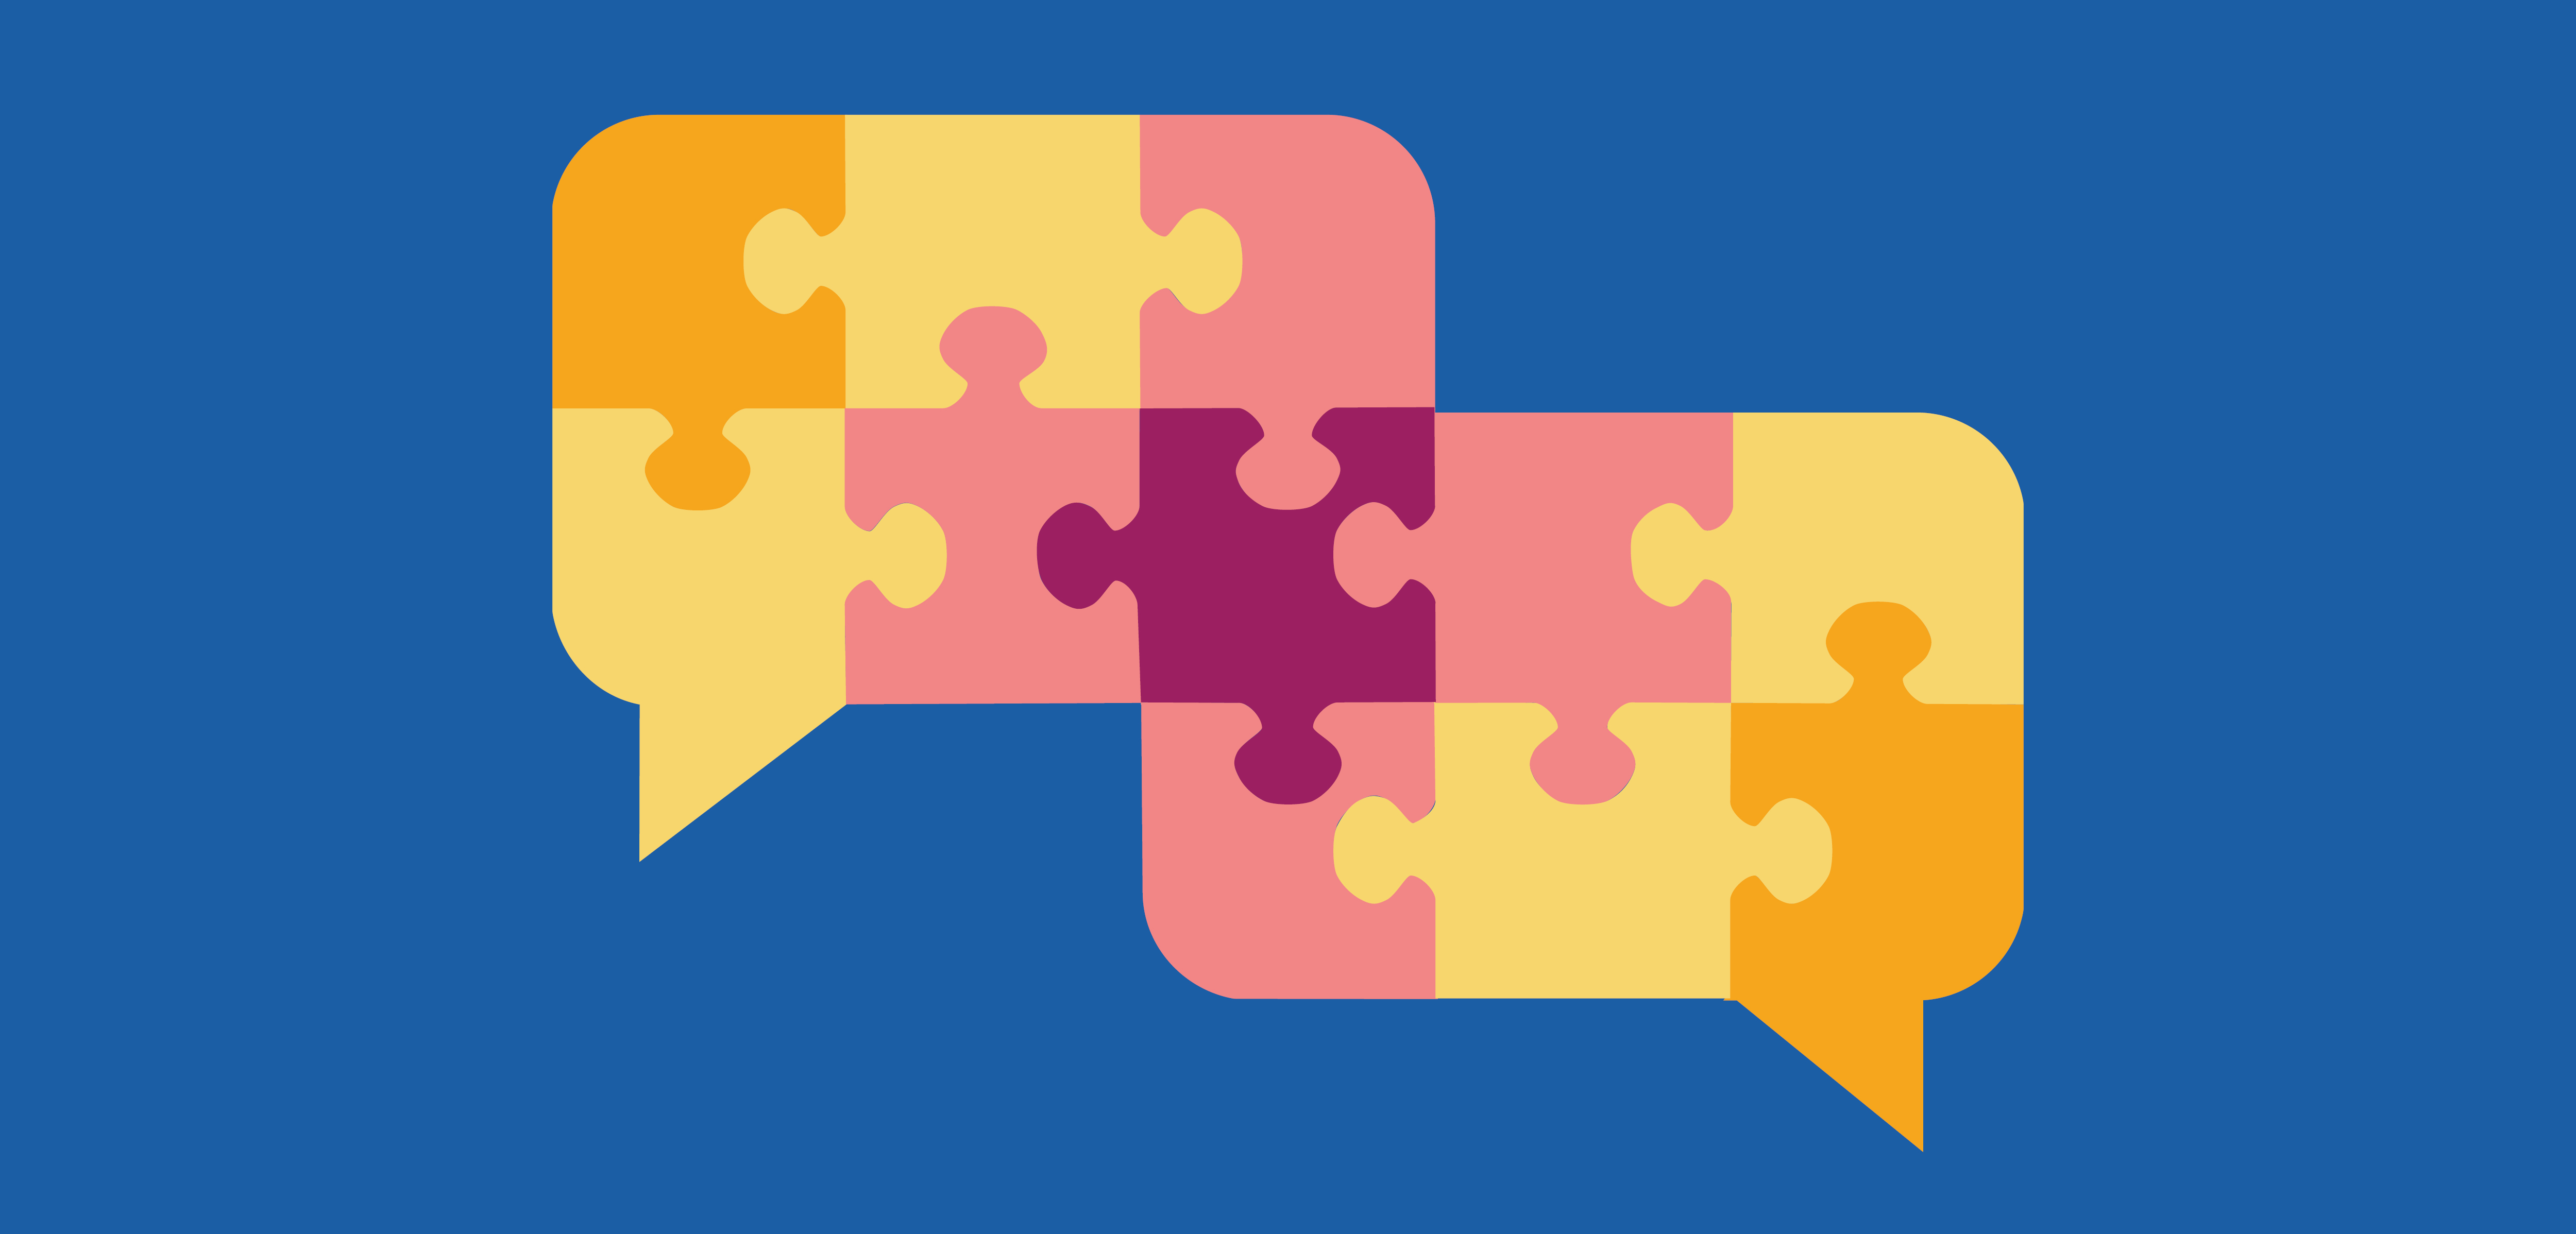 A blue background with two chat bubbles made with puzzle pieces of yellow, pink, orange and red.